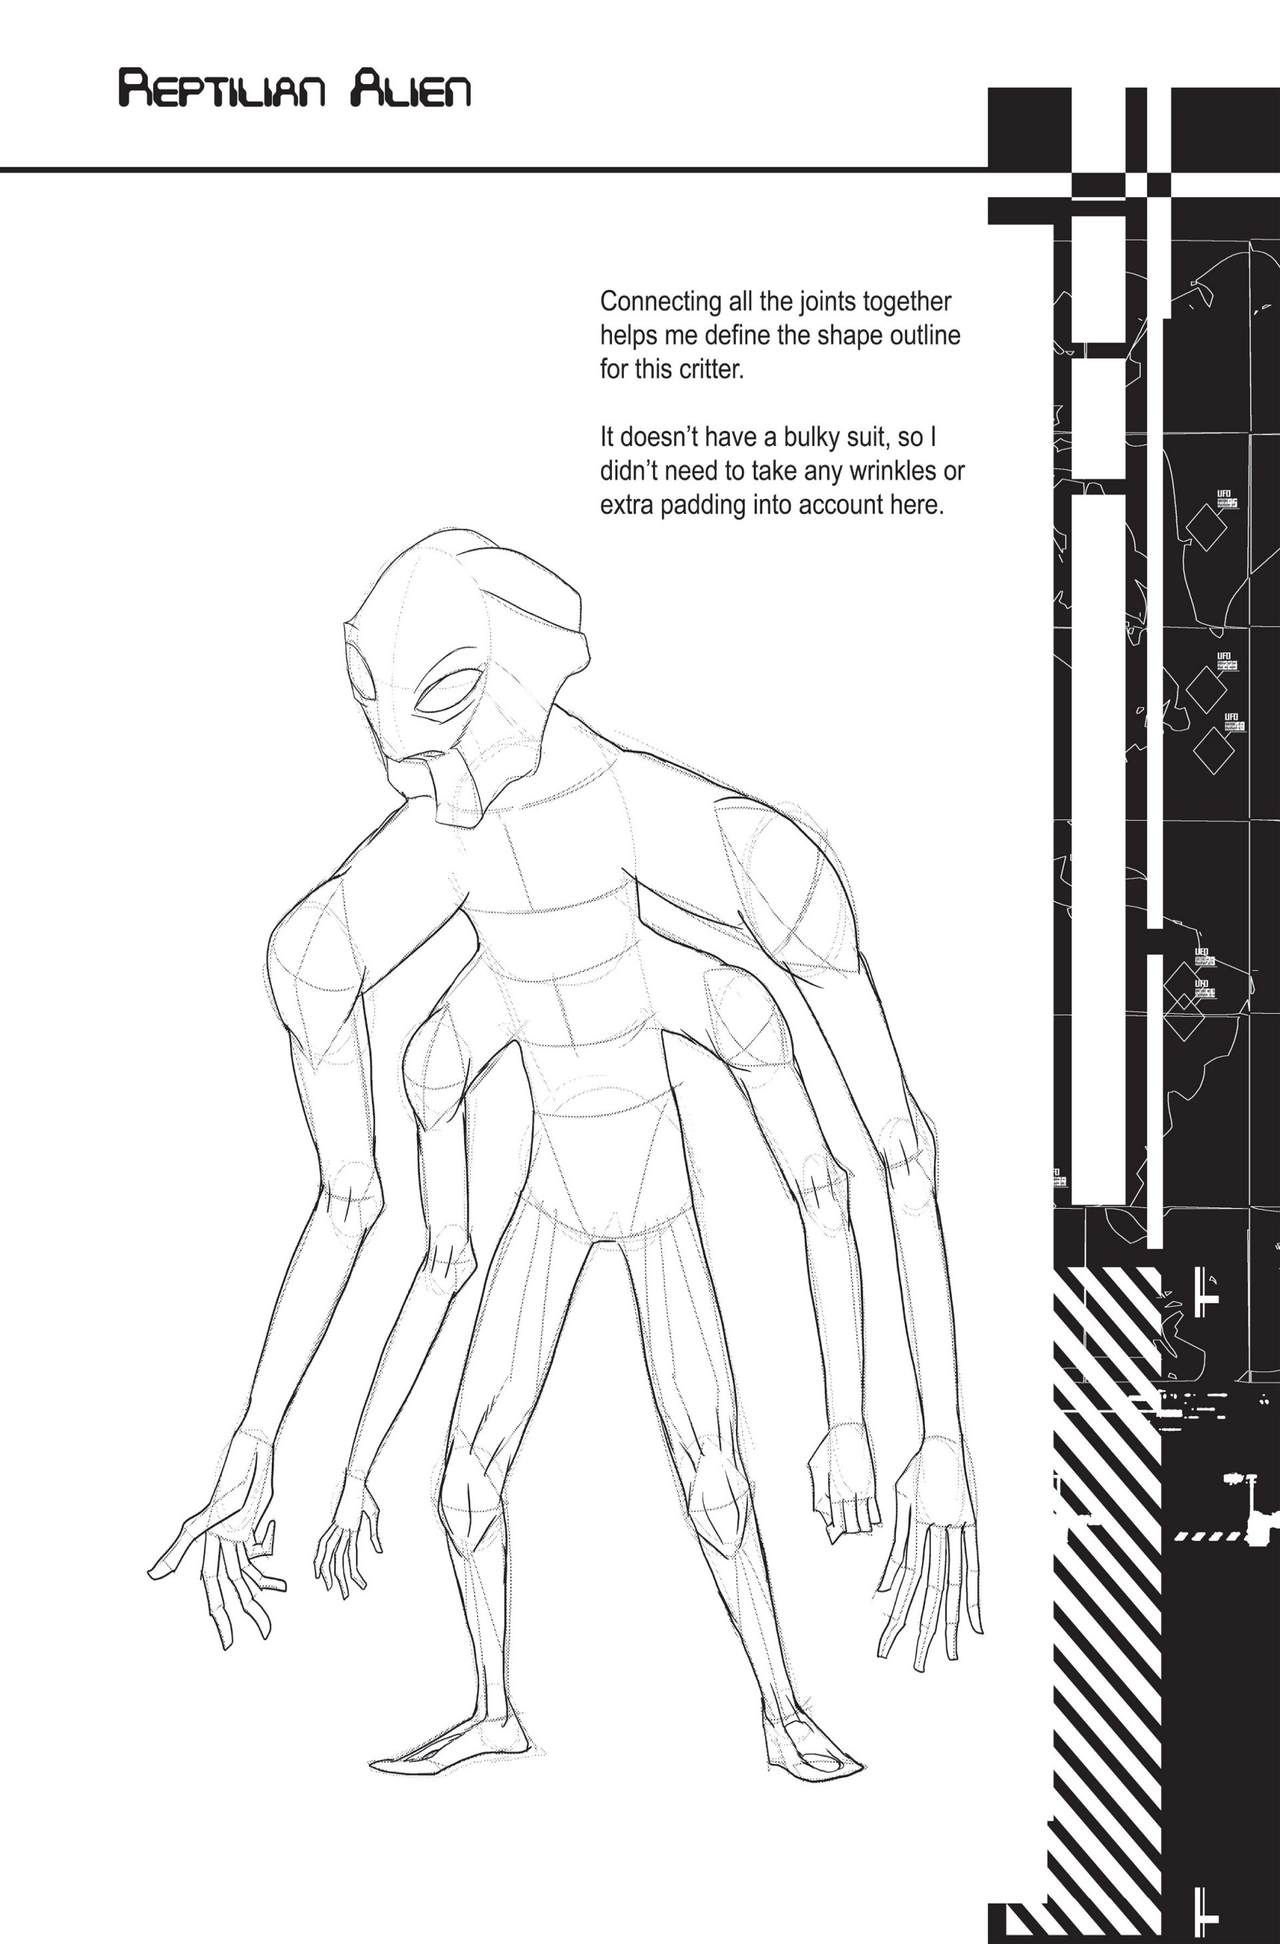 How To Draw And Battle Alien Invasions(2012) 39